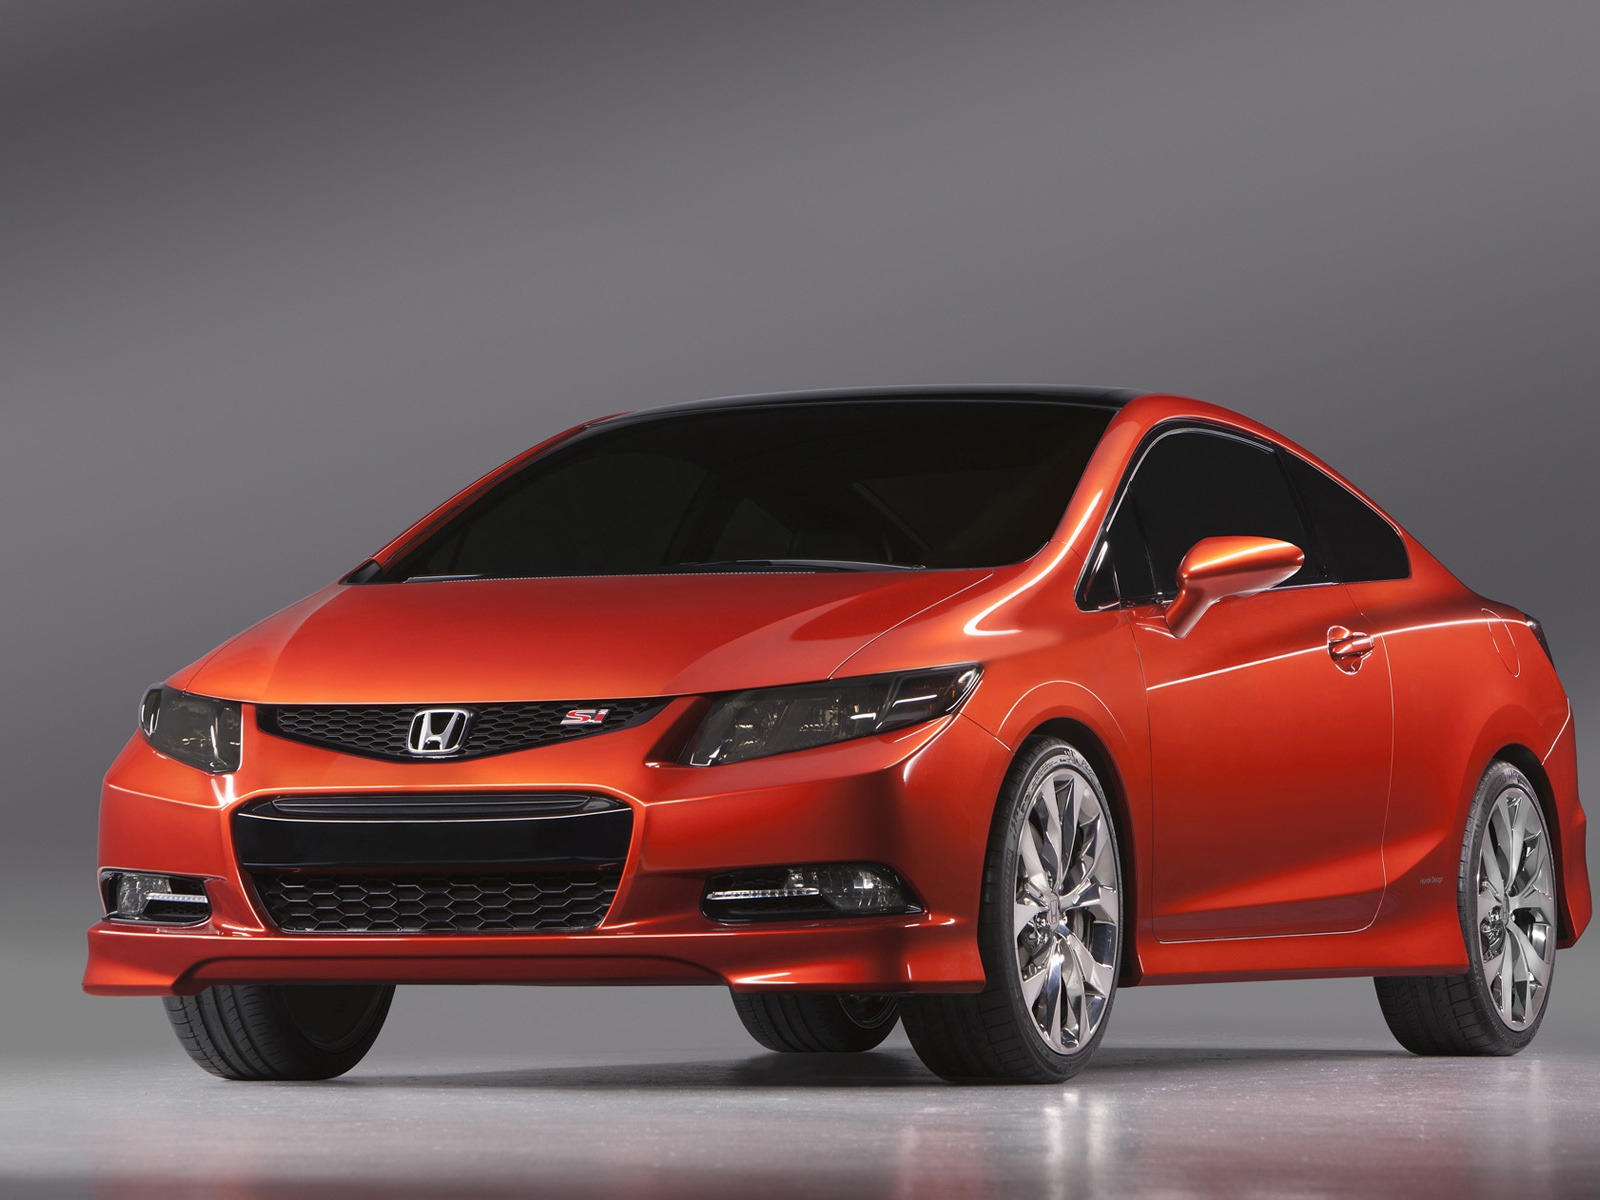 2011 Honda Civic Si Concept for 1600 x 1200 resolution